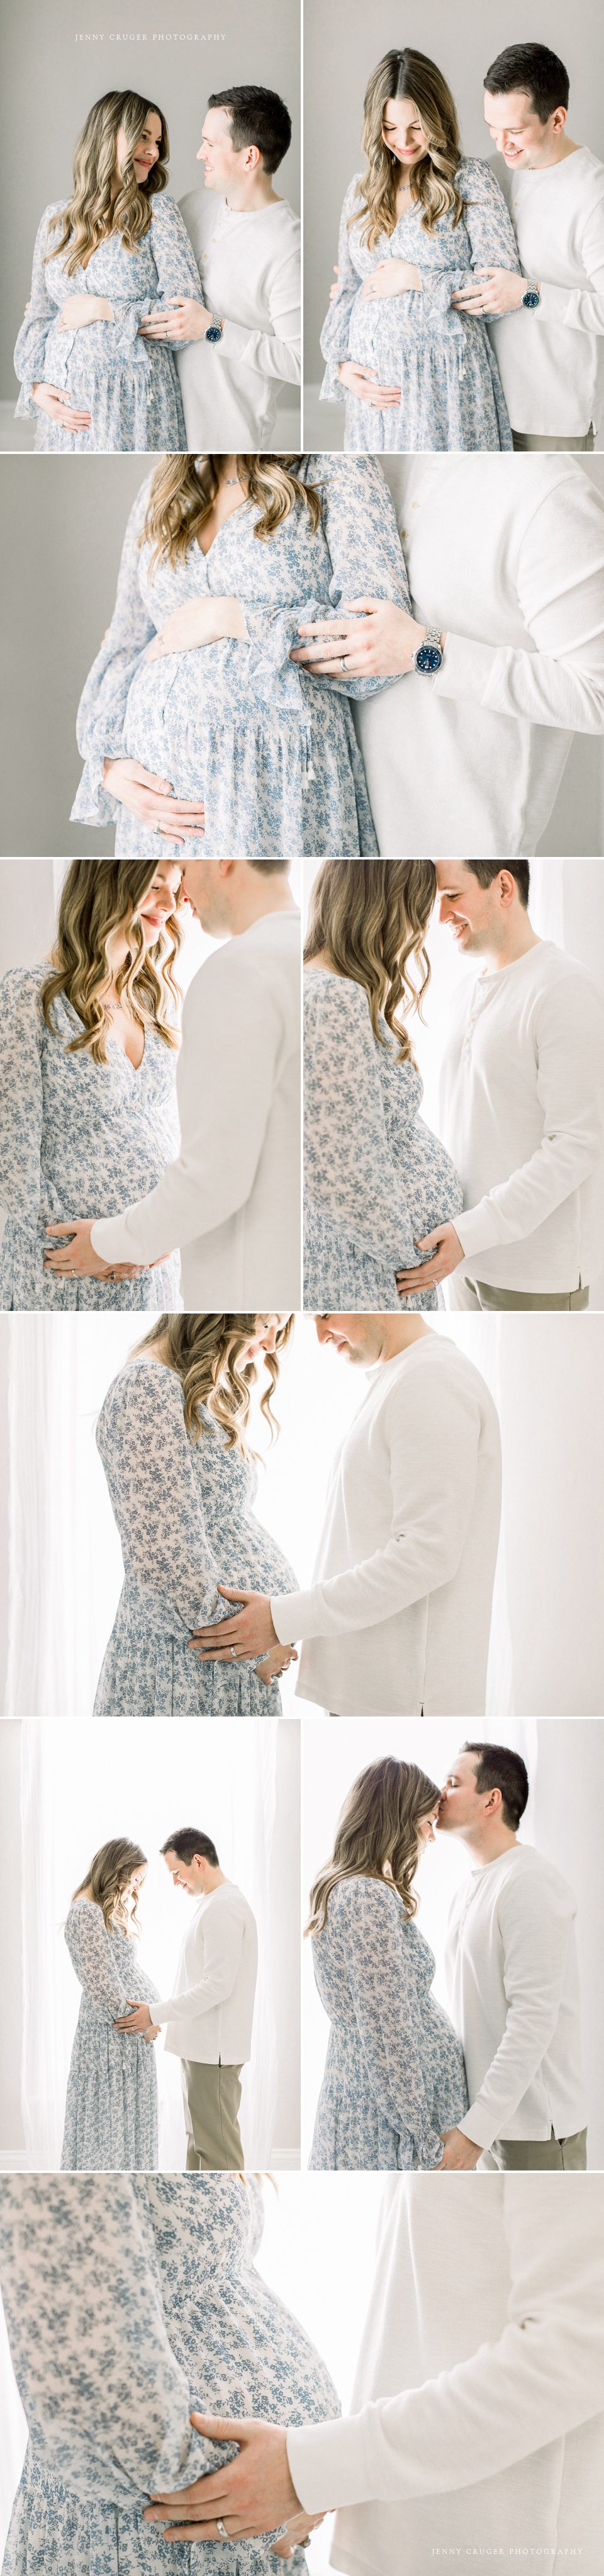 studio maternity session with mom and dad